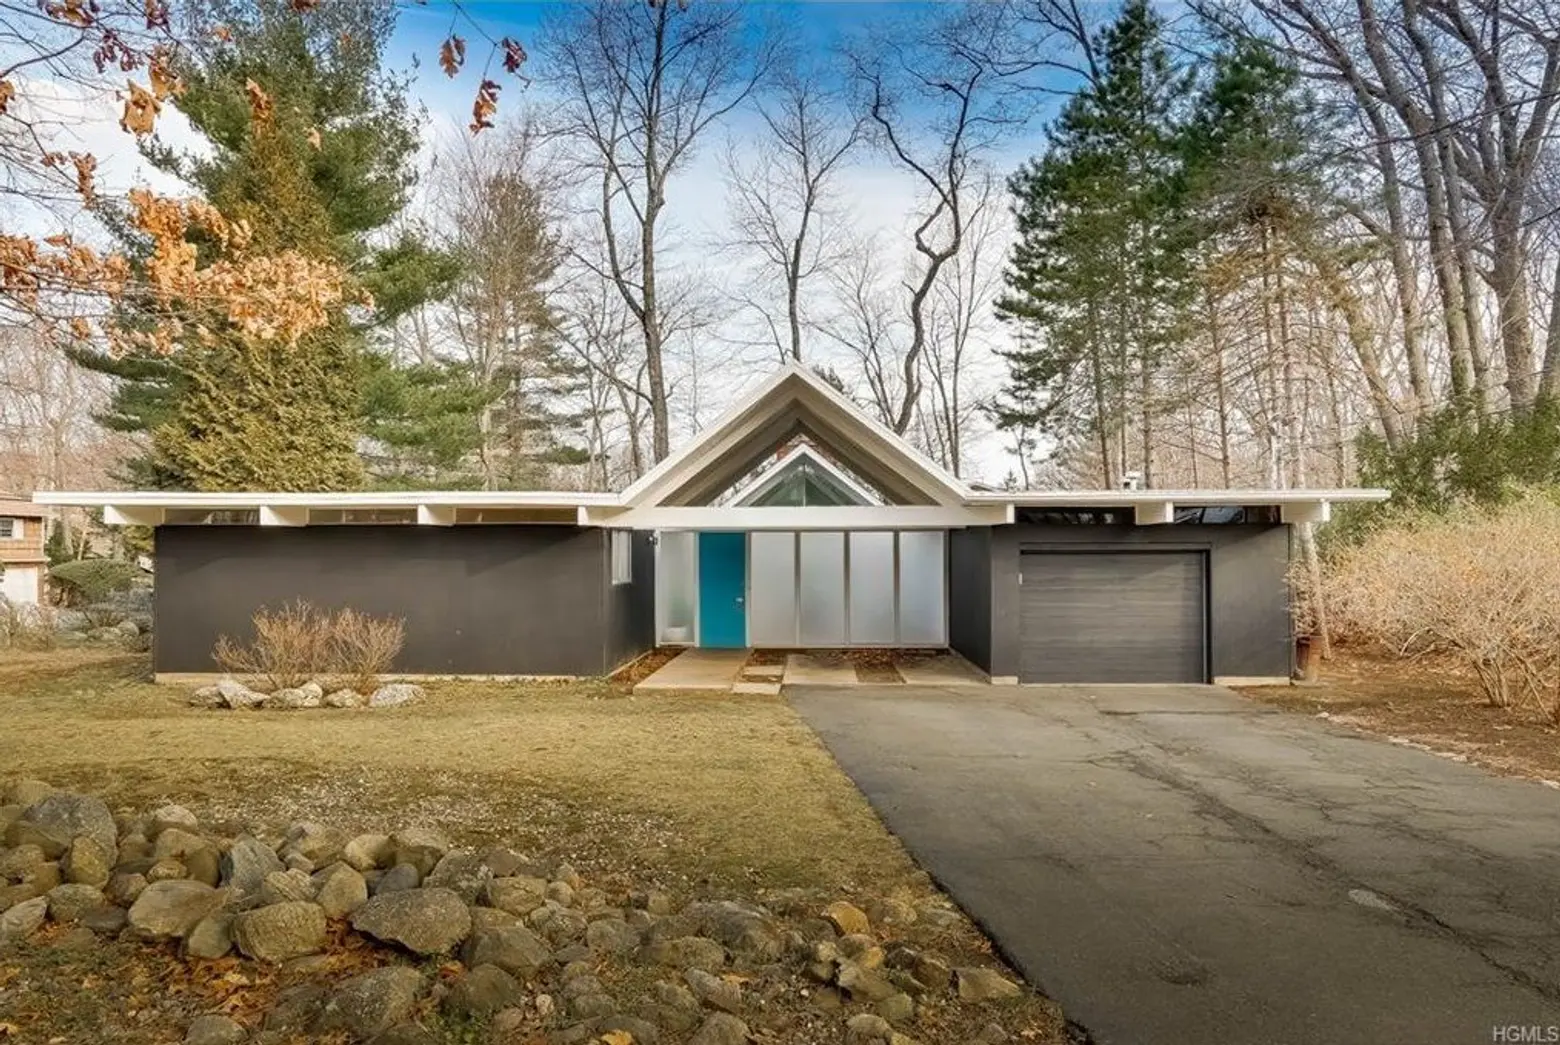 Modern-spotting: The lost Eichlers of Rockland County, New York